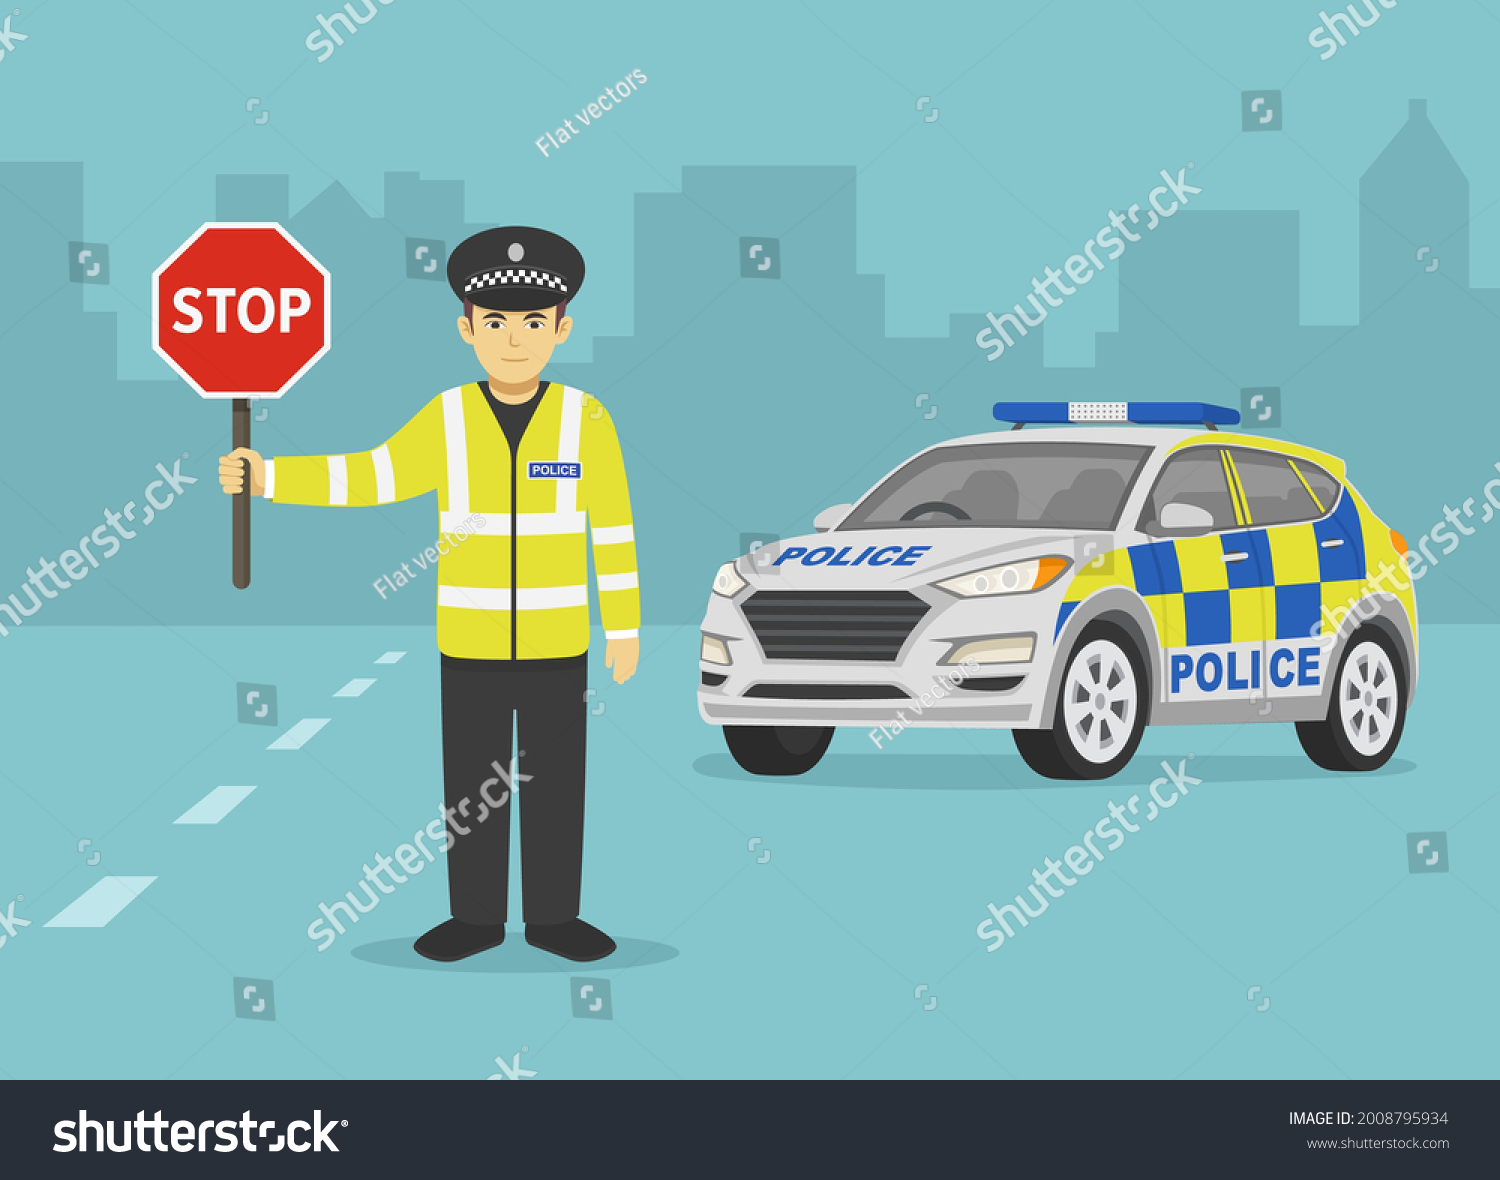 SVG of Isolated british traffic police officer holding a stop sign. Police suv car perspective front view. Flat vector illustration template. svg